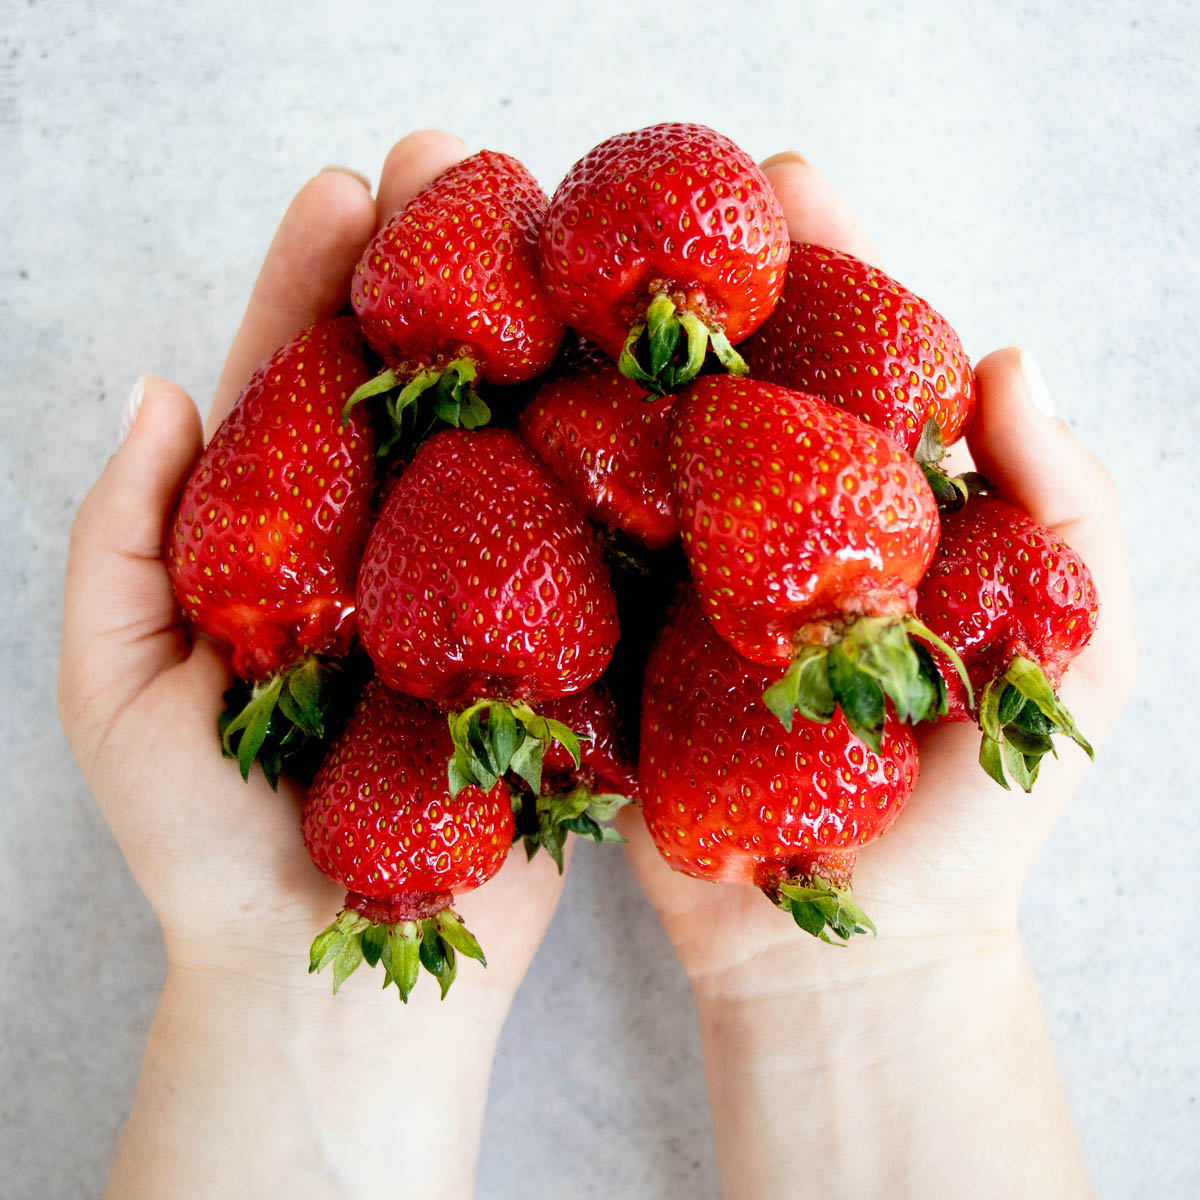 Hands full of whole strawberries